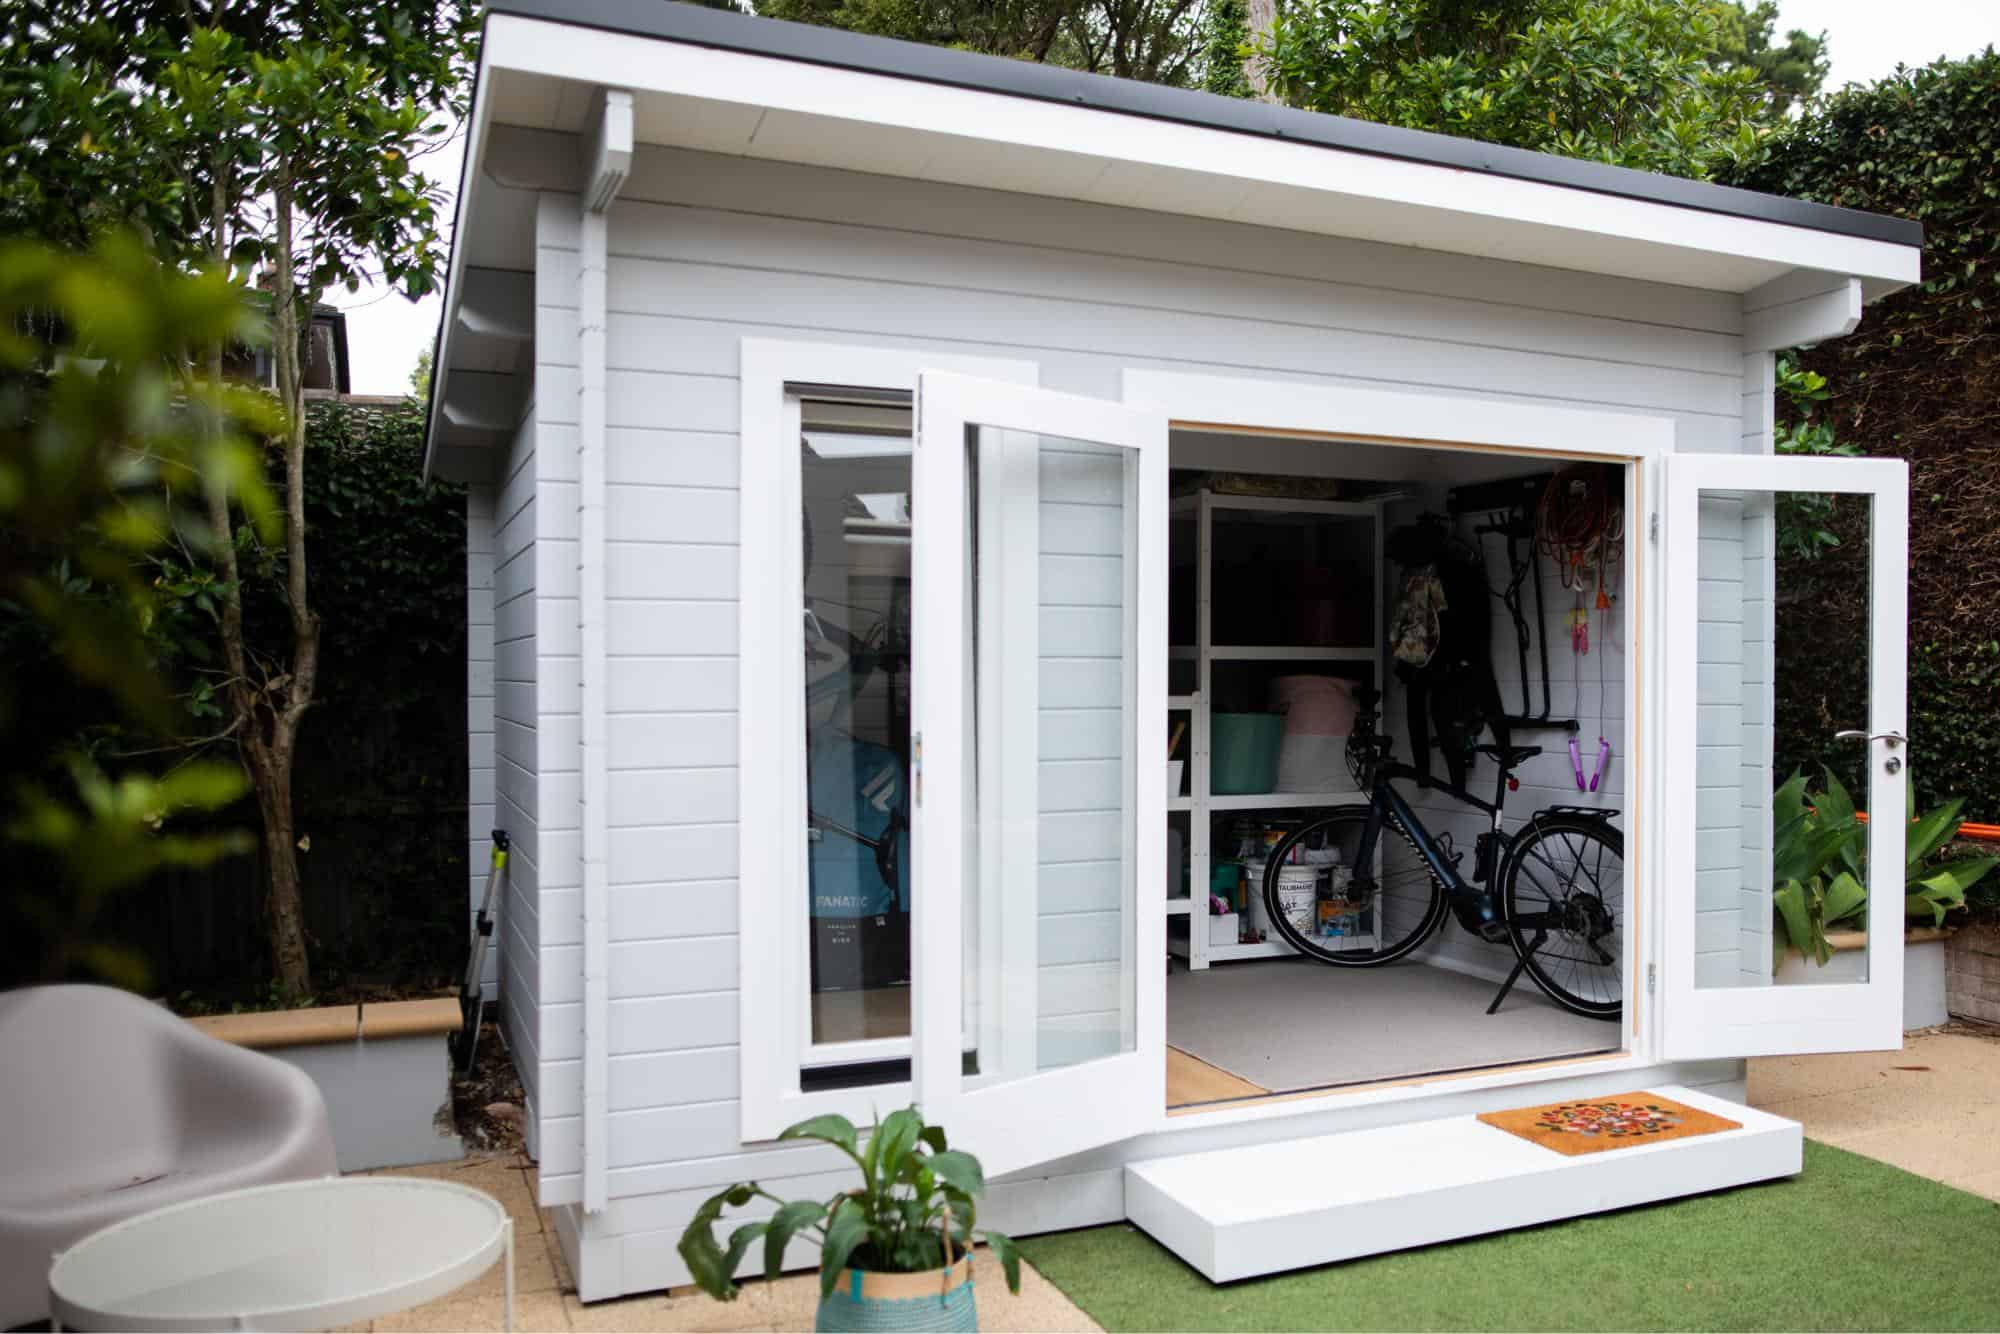 Garden shed with open doors and shelving and a bike inside.